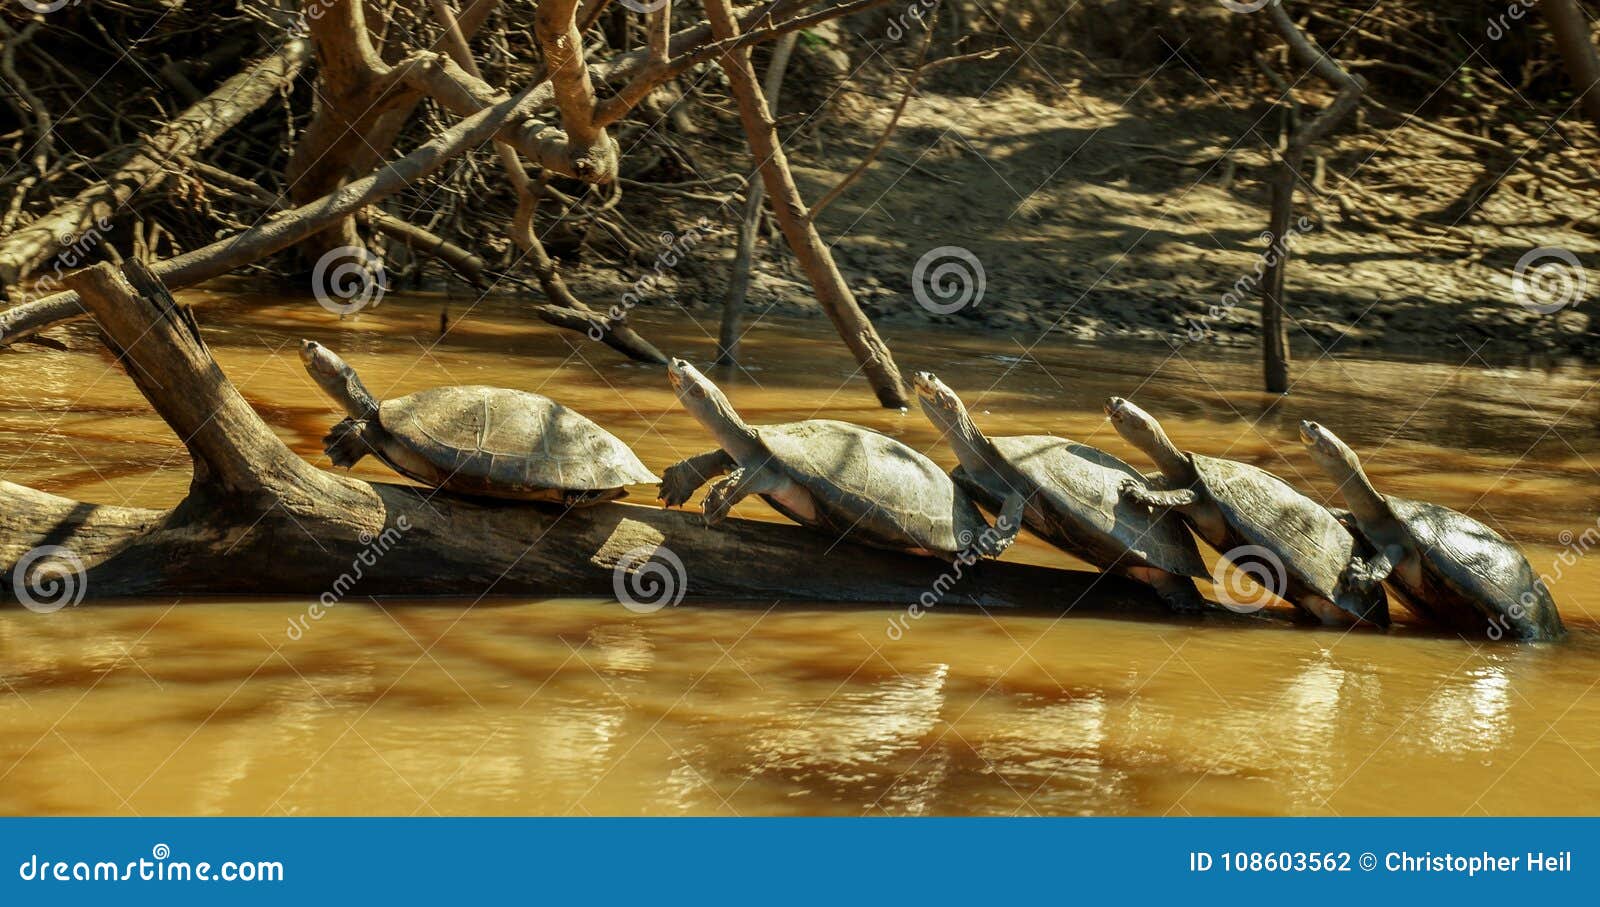 turtle meet up in the amazon river.